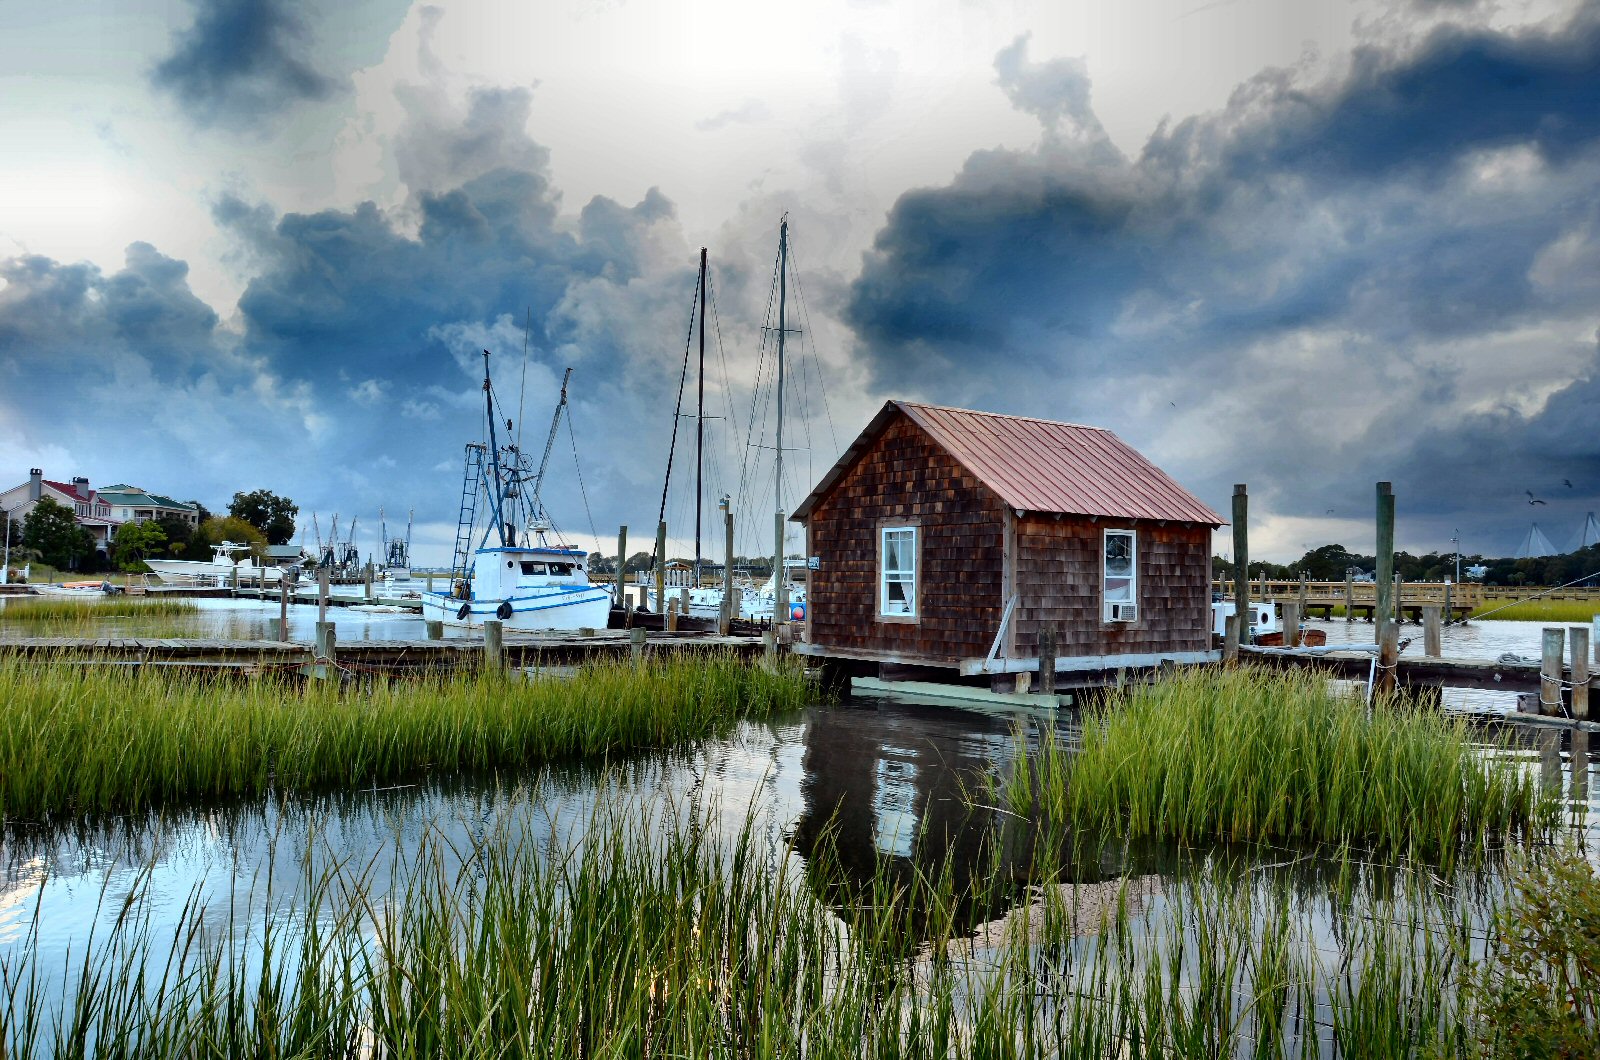 WINNER! Amateur category: Before the Storm by Pamela Talbird; “I was driving through Mt. Pleasant when a storm was moving in.  The sky was changing drastically so I stopped off at Shem Creek to shoot a few photos before the downpour.”